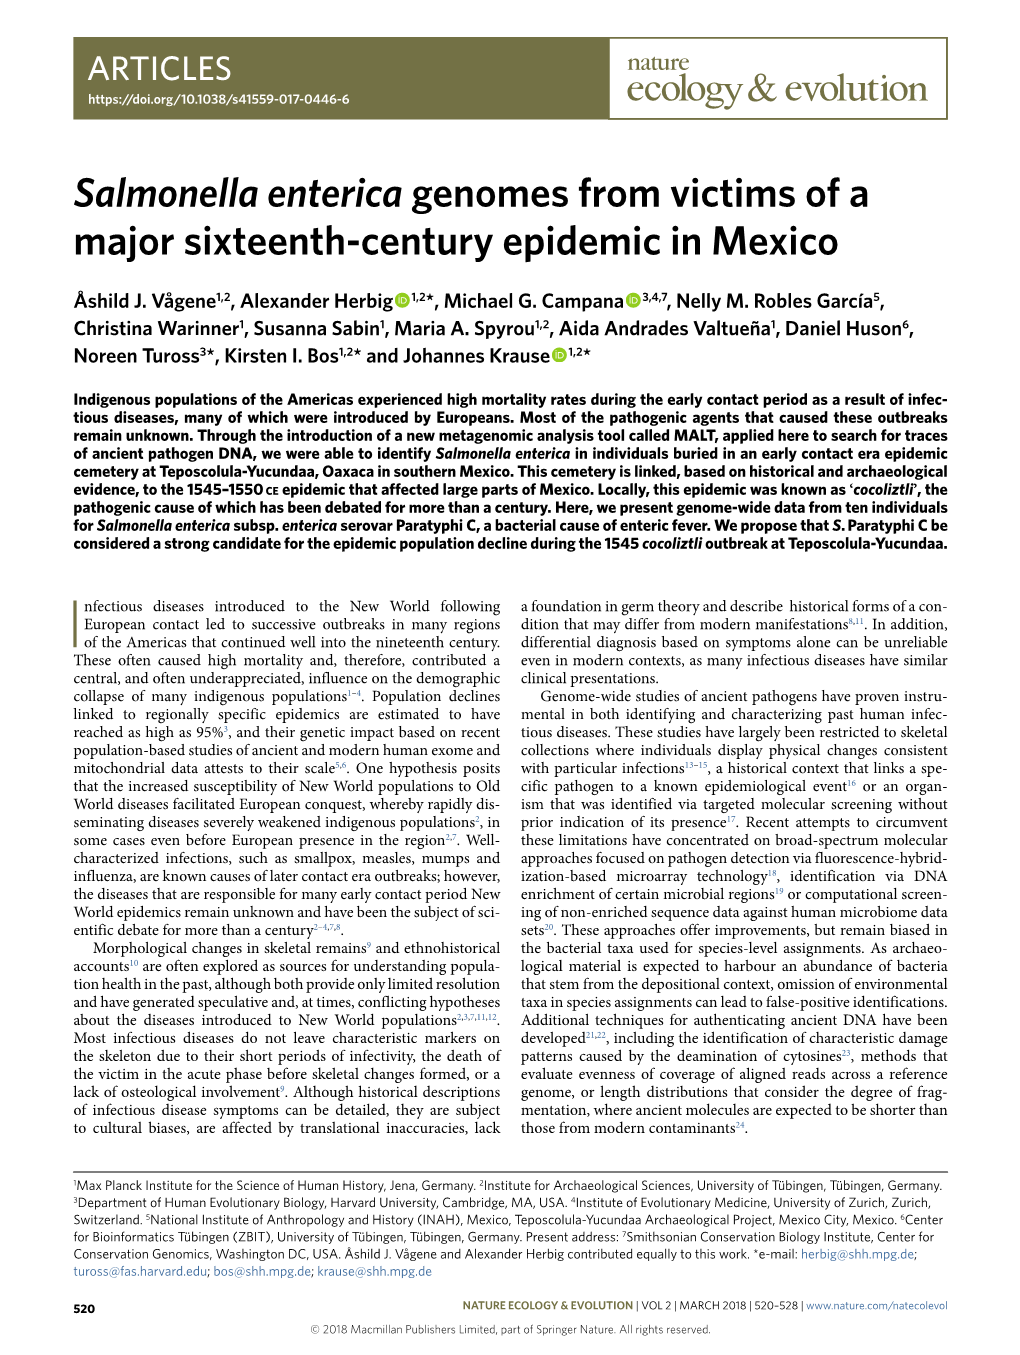 Salmonella Enterica Genomes from Victims of a Major Sixteenth-Century Epidemic in Mexico